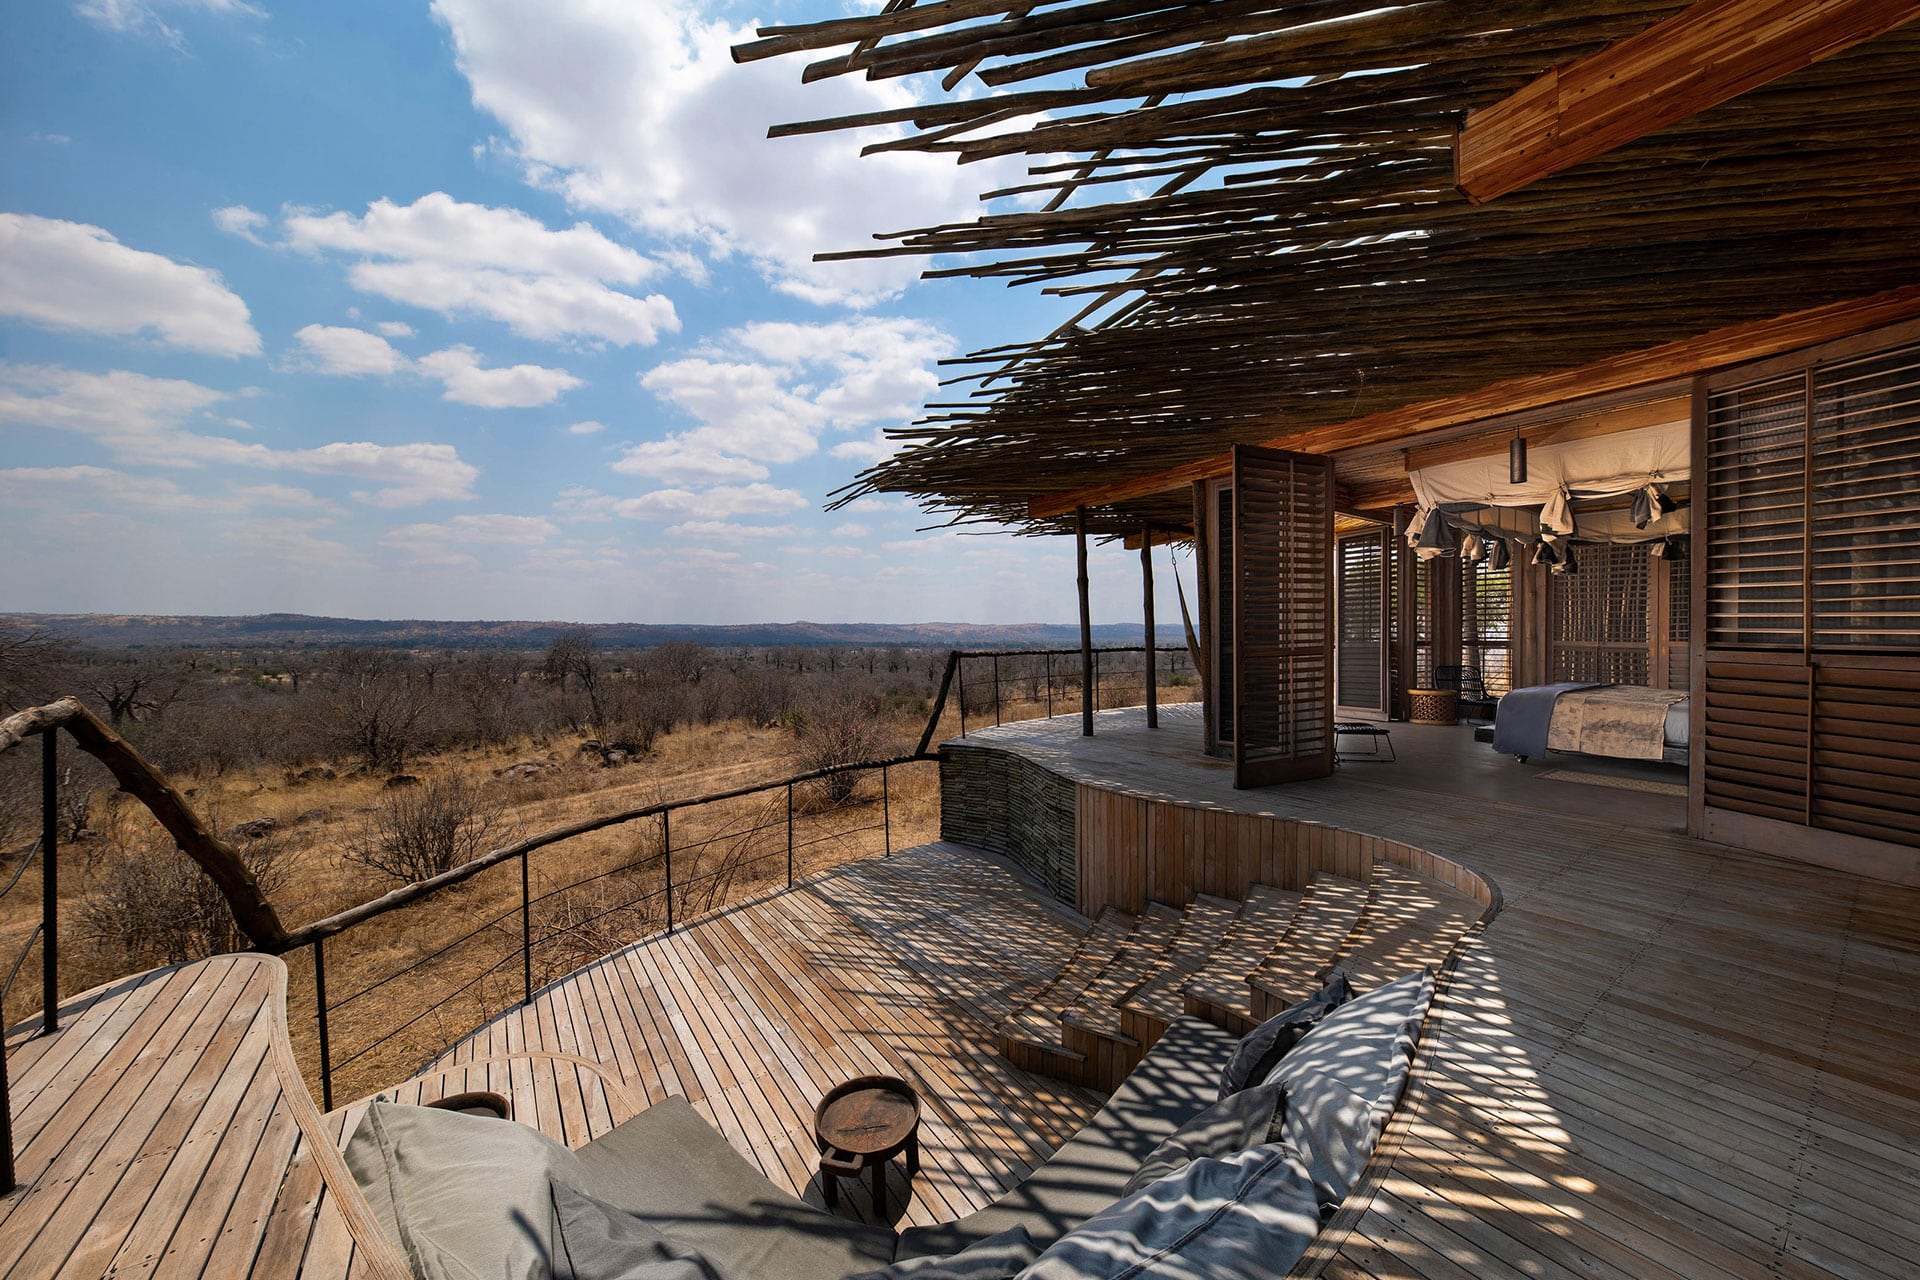 A wooden bedroom suite with private deck at Jabali Ridge in Ruaha National Park, Tanzania.